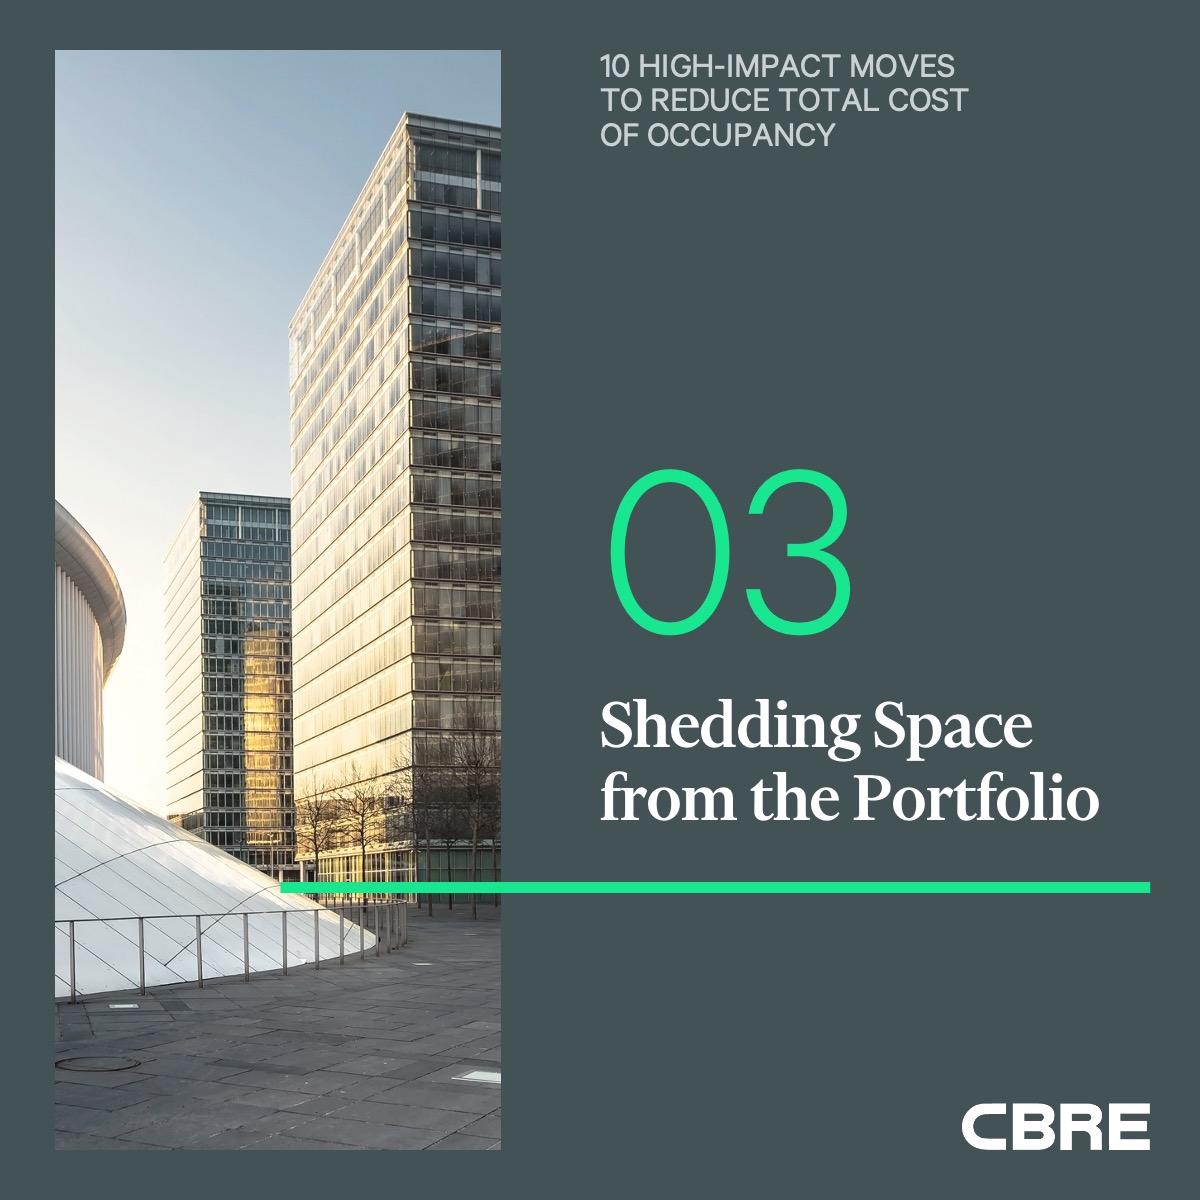 To reduce operating expenses, sale-leaseback arrangements unlock trapped capital and provide income to reinvest in the business. Review this and other high-impact moves to reduce occupancy costs in CBRE Institute’s recent report: cbre.co/3TbMCb6